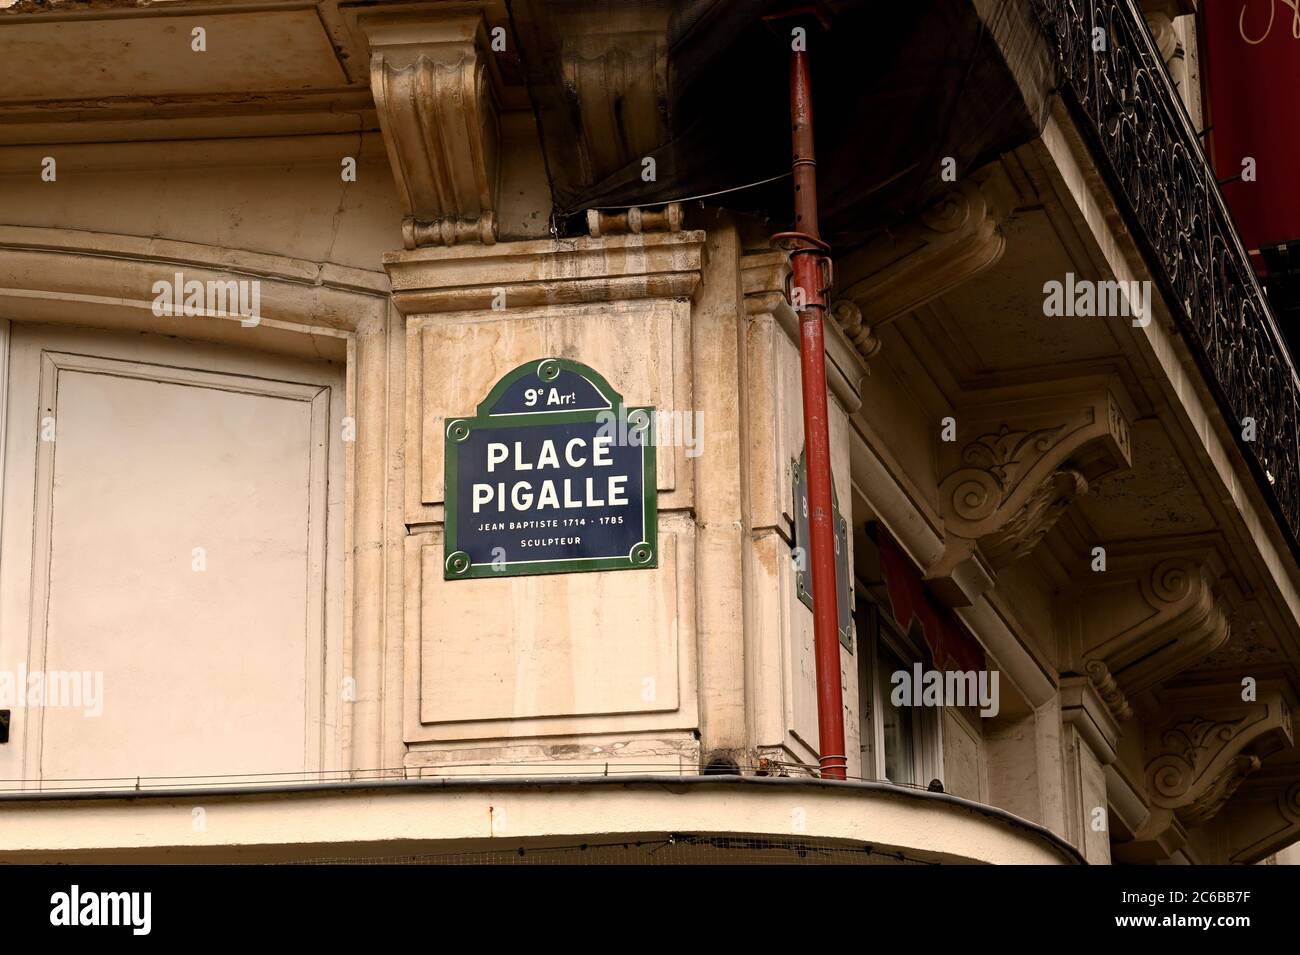 Famous place in Paris, Known for hot night life Stock Photo